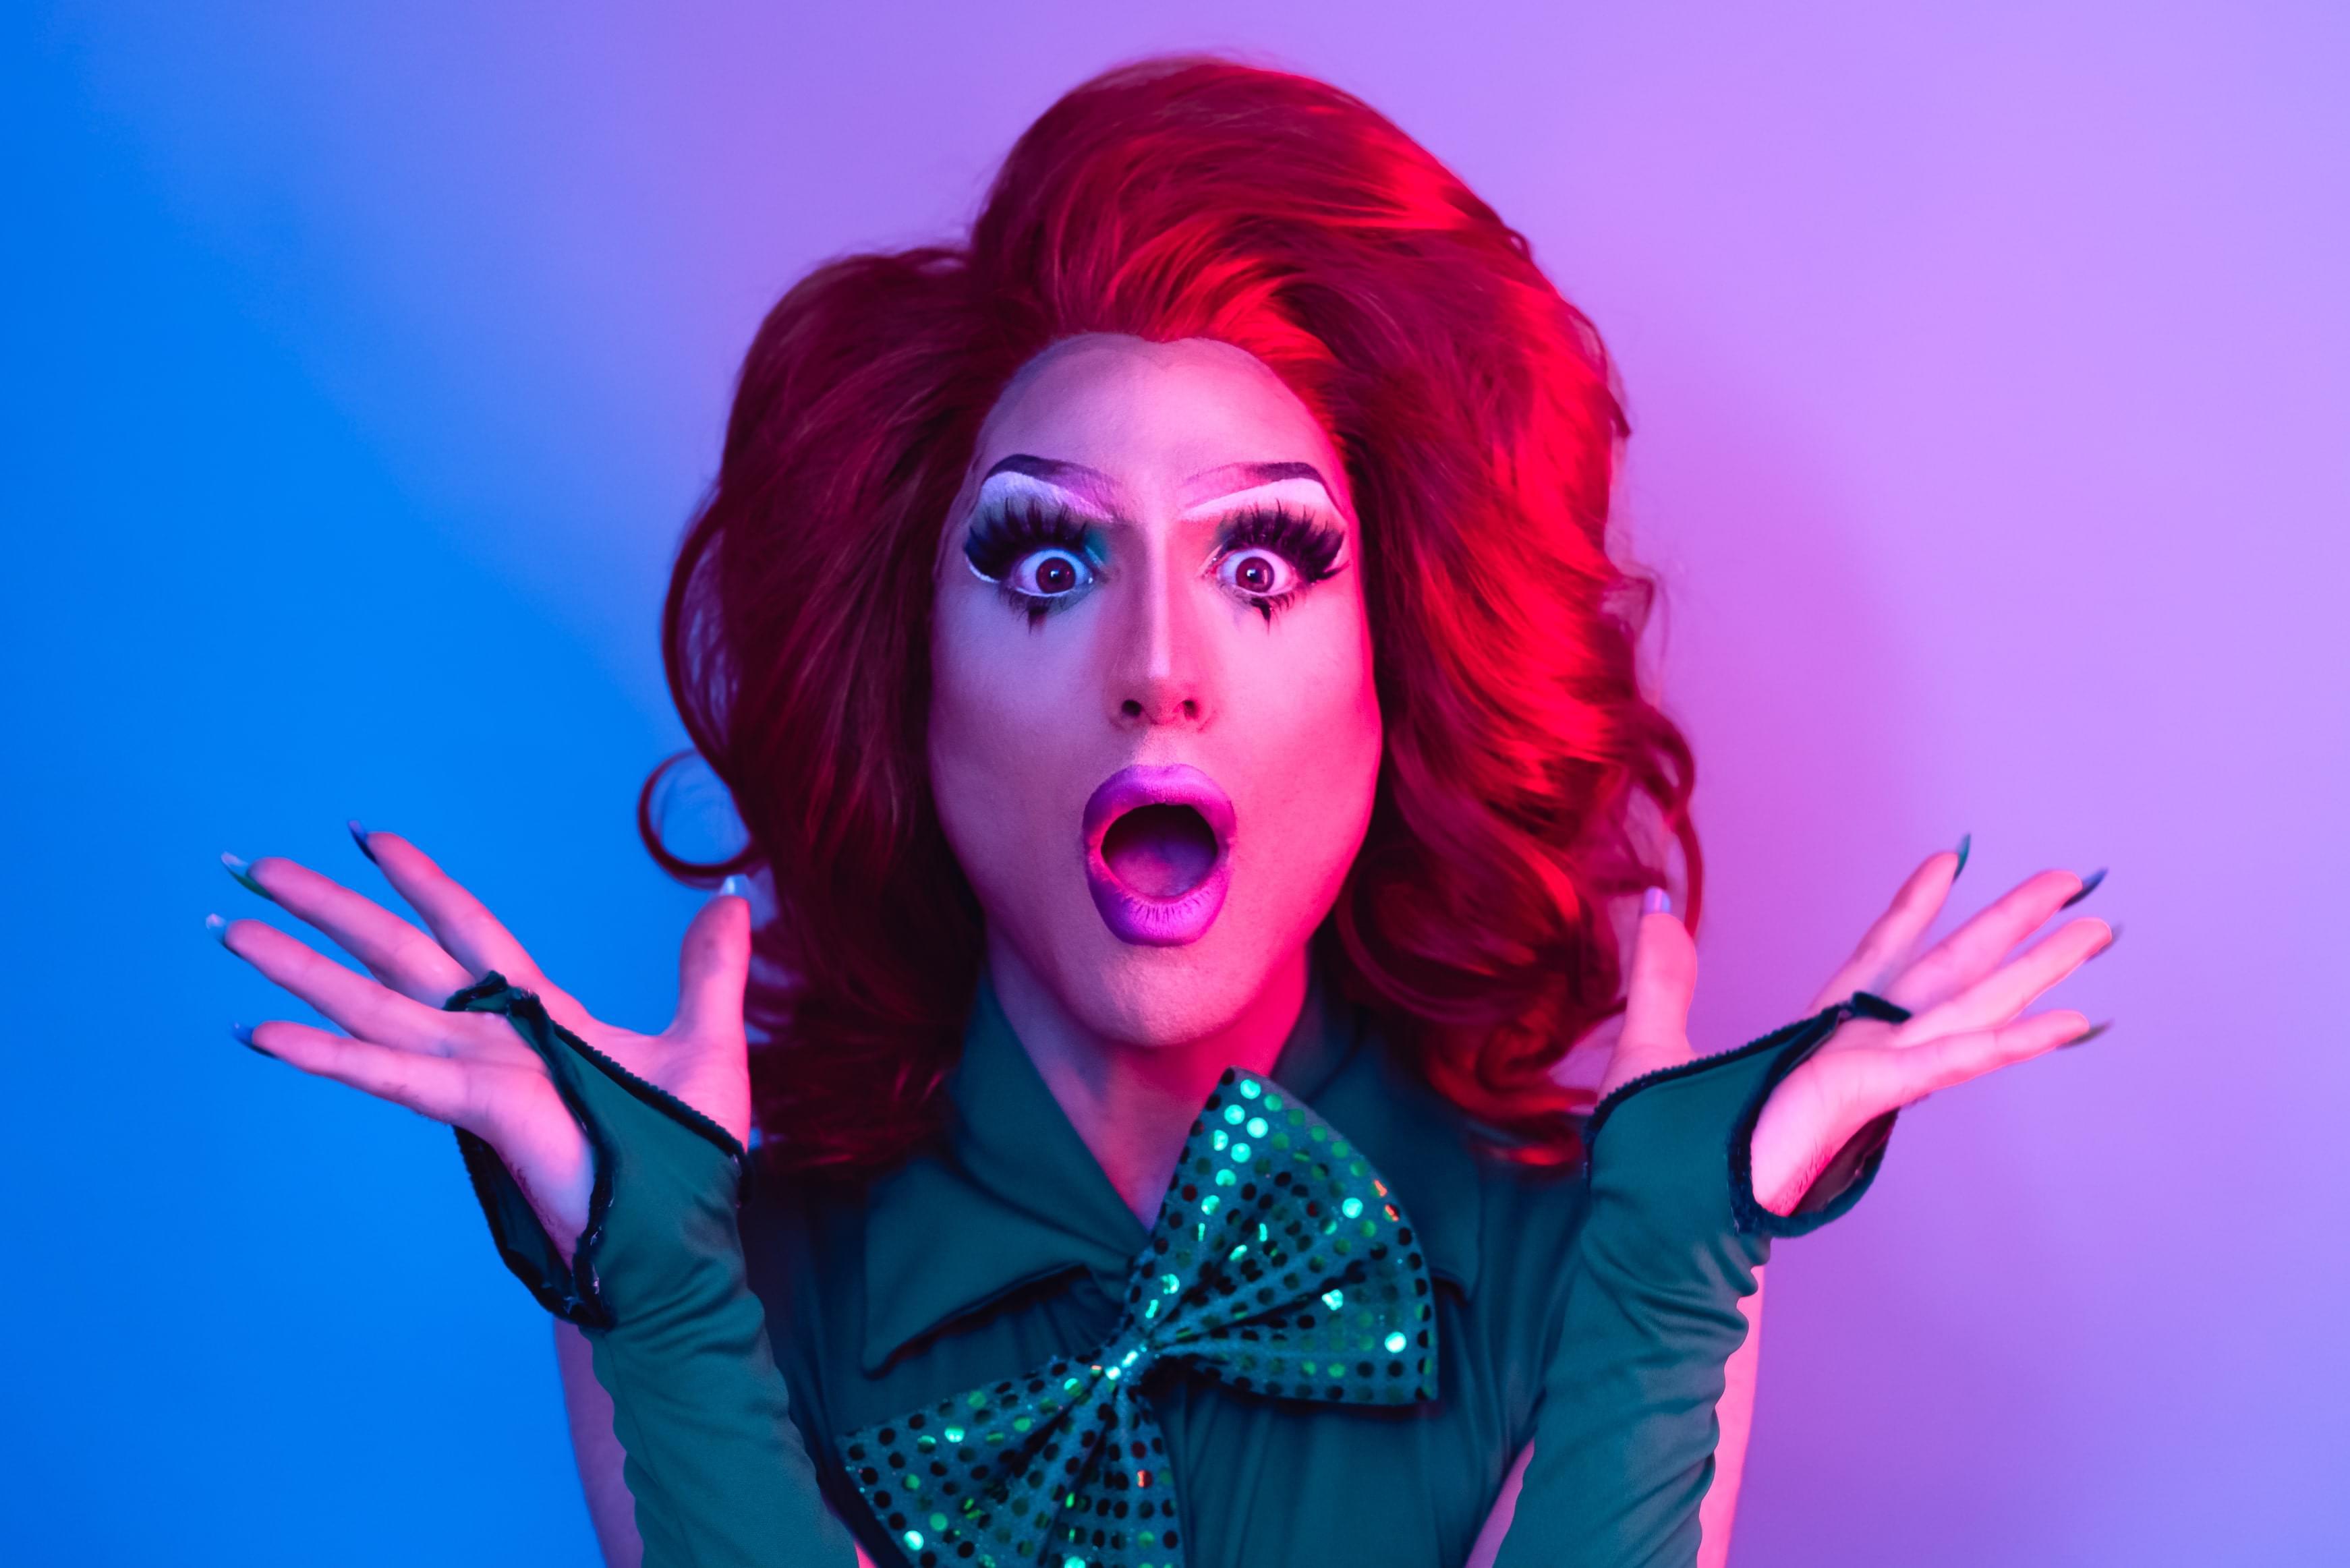 A red-haired drag queen looking surprised in front of a blue and purple background.